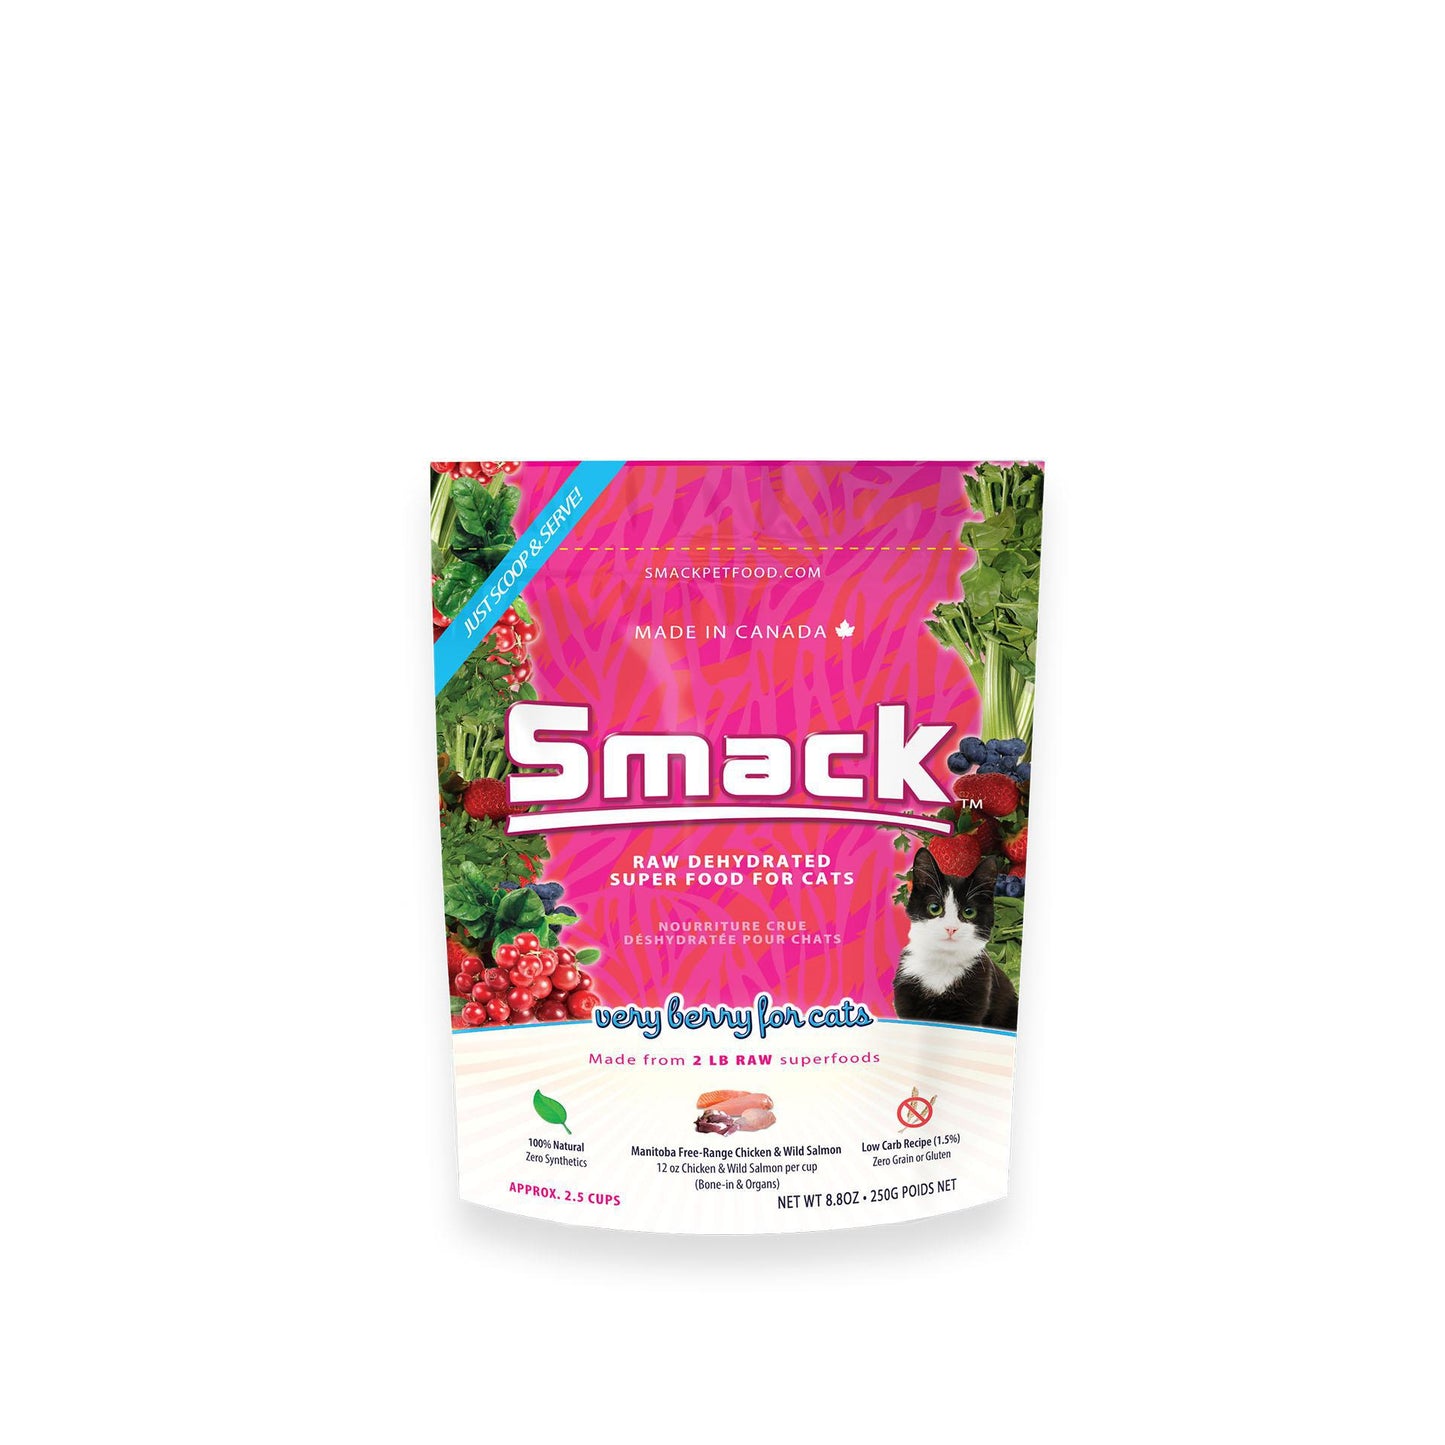 Smack - Dehydrated Raw Cat Food